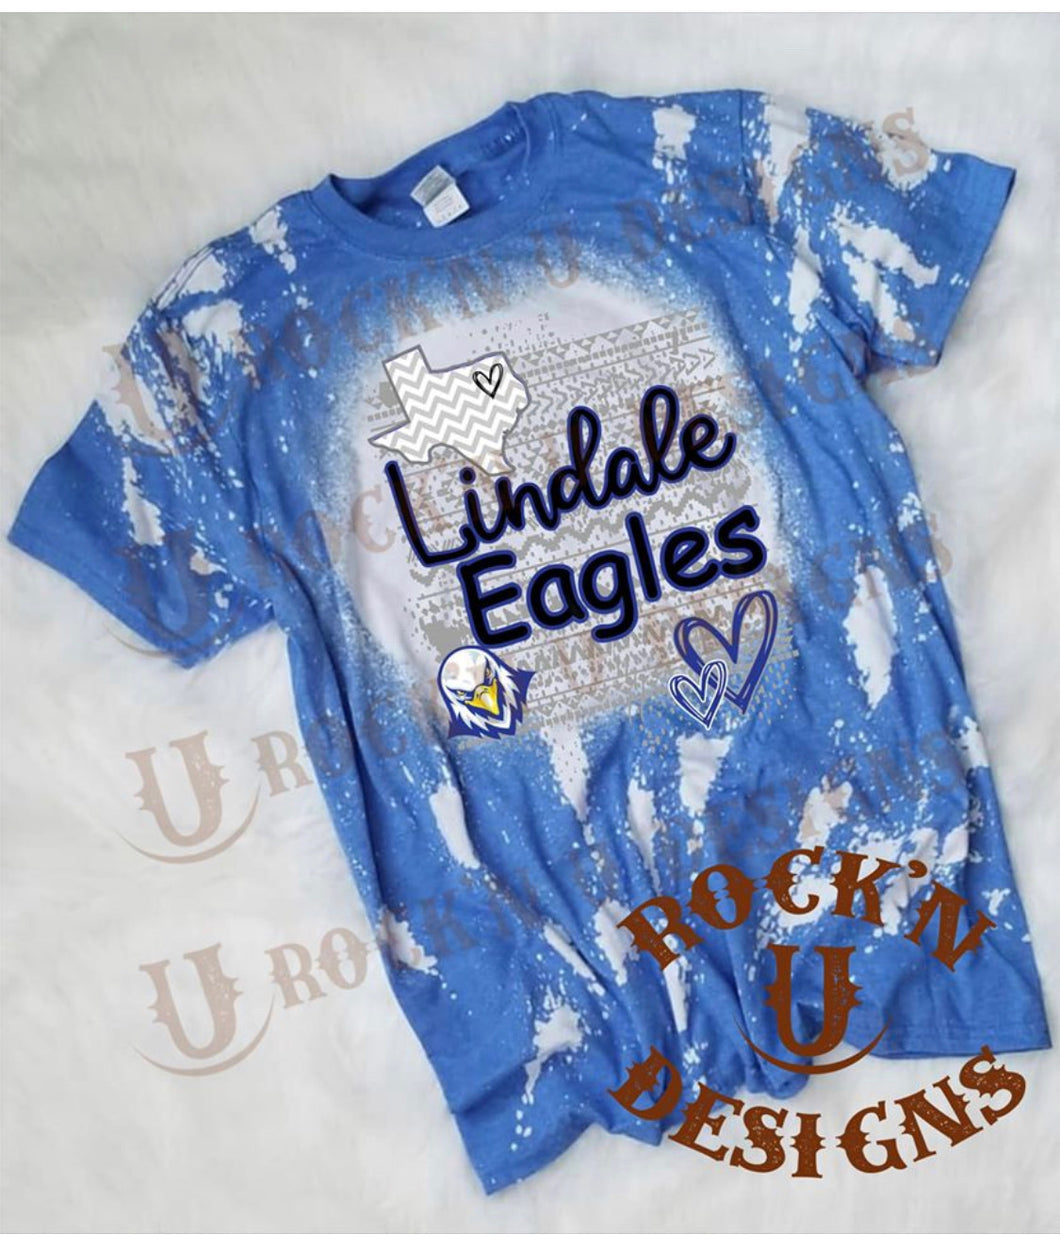 LIindale Eagles Personalized Custom Bleached Graphic Design